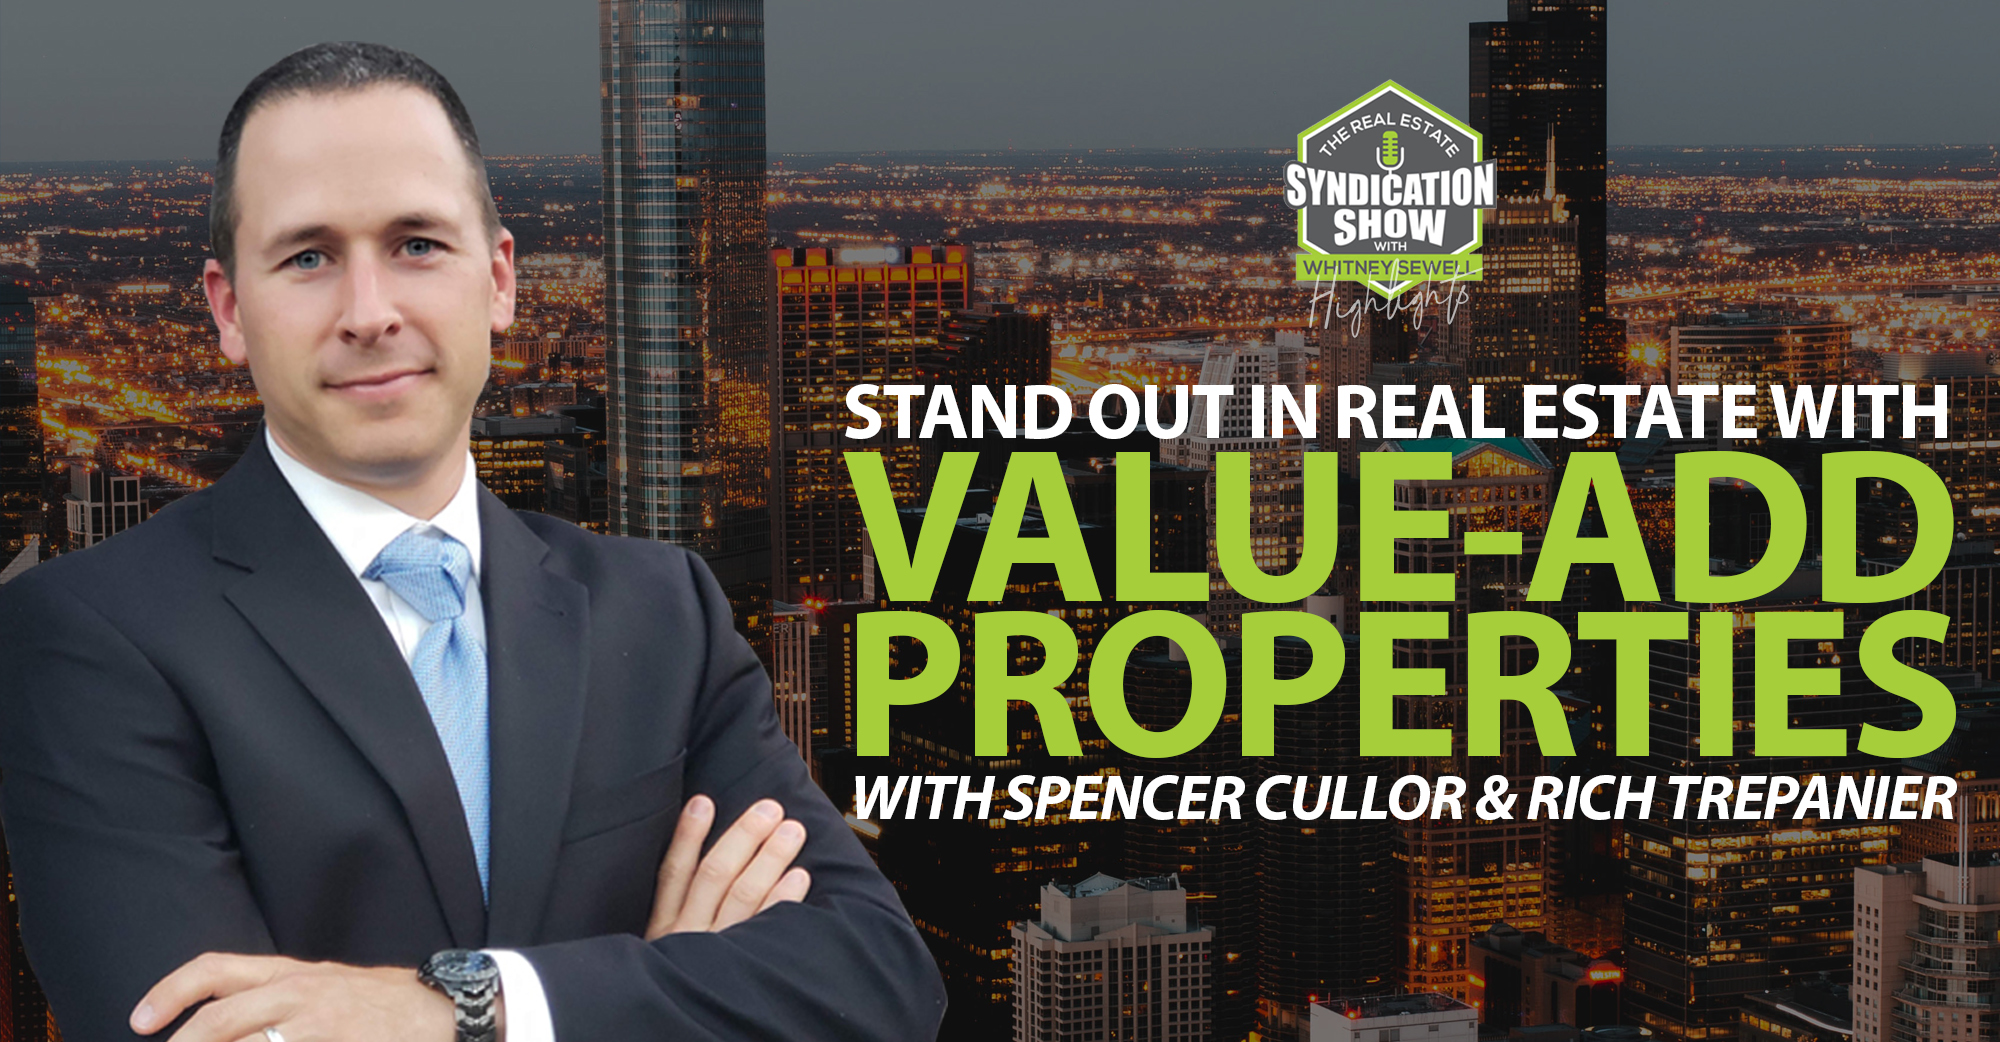 Standout In Real Estate With Value-Add Properties